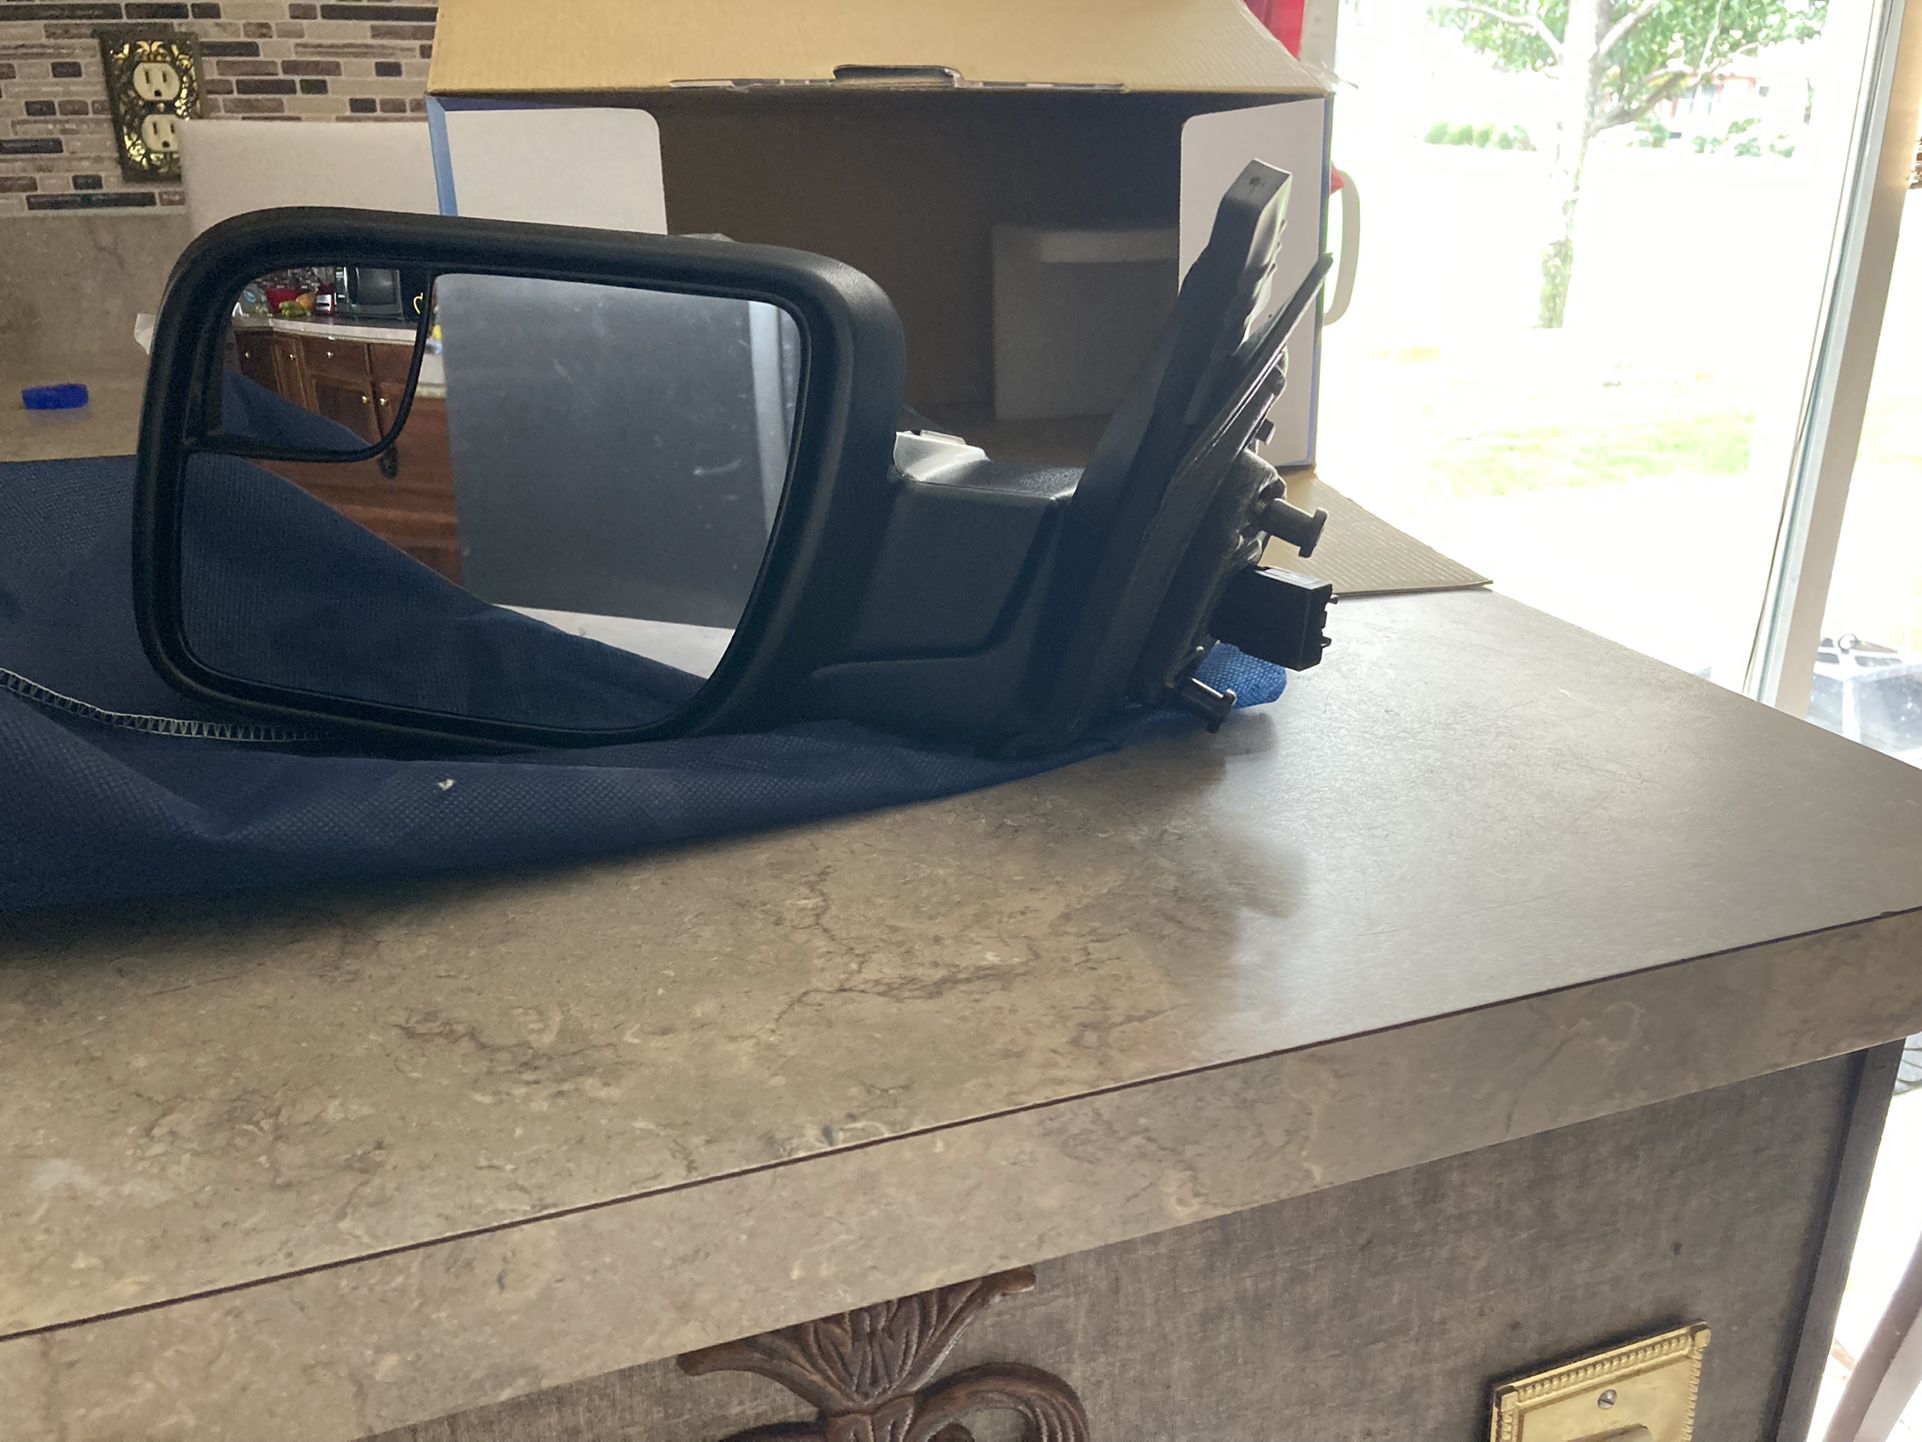 Ford Explorer Rear View Mirror (NEW)